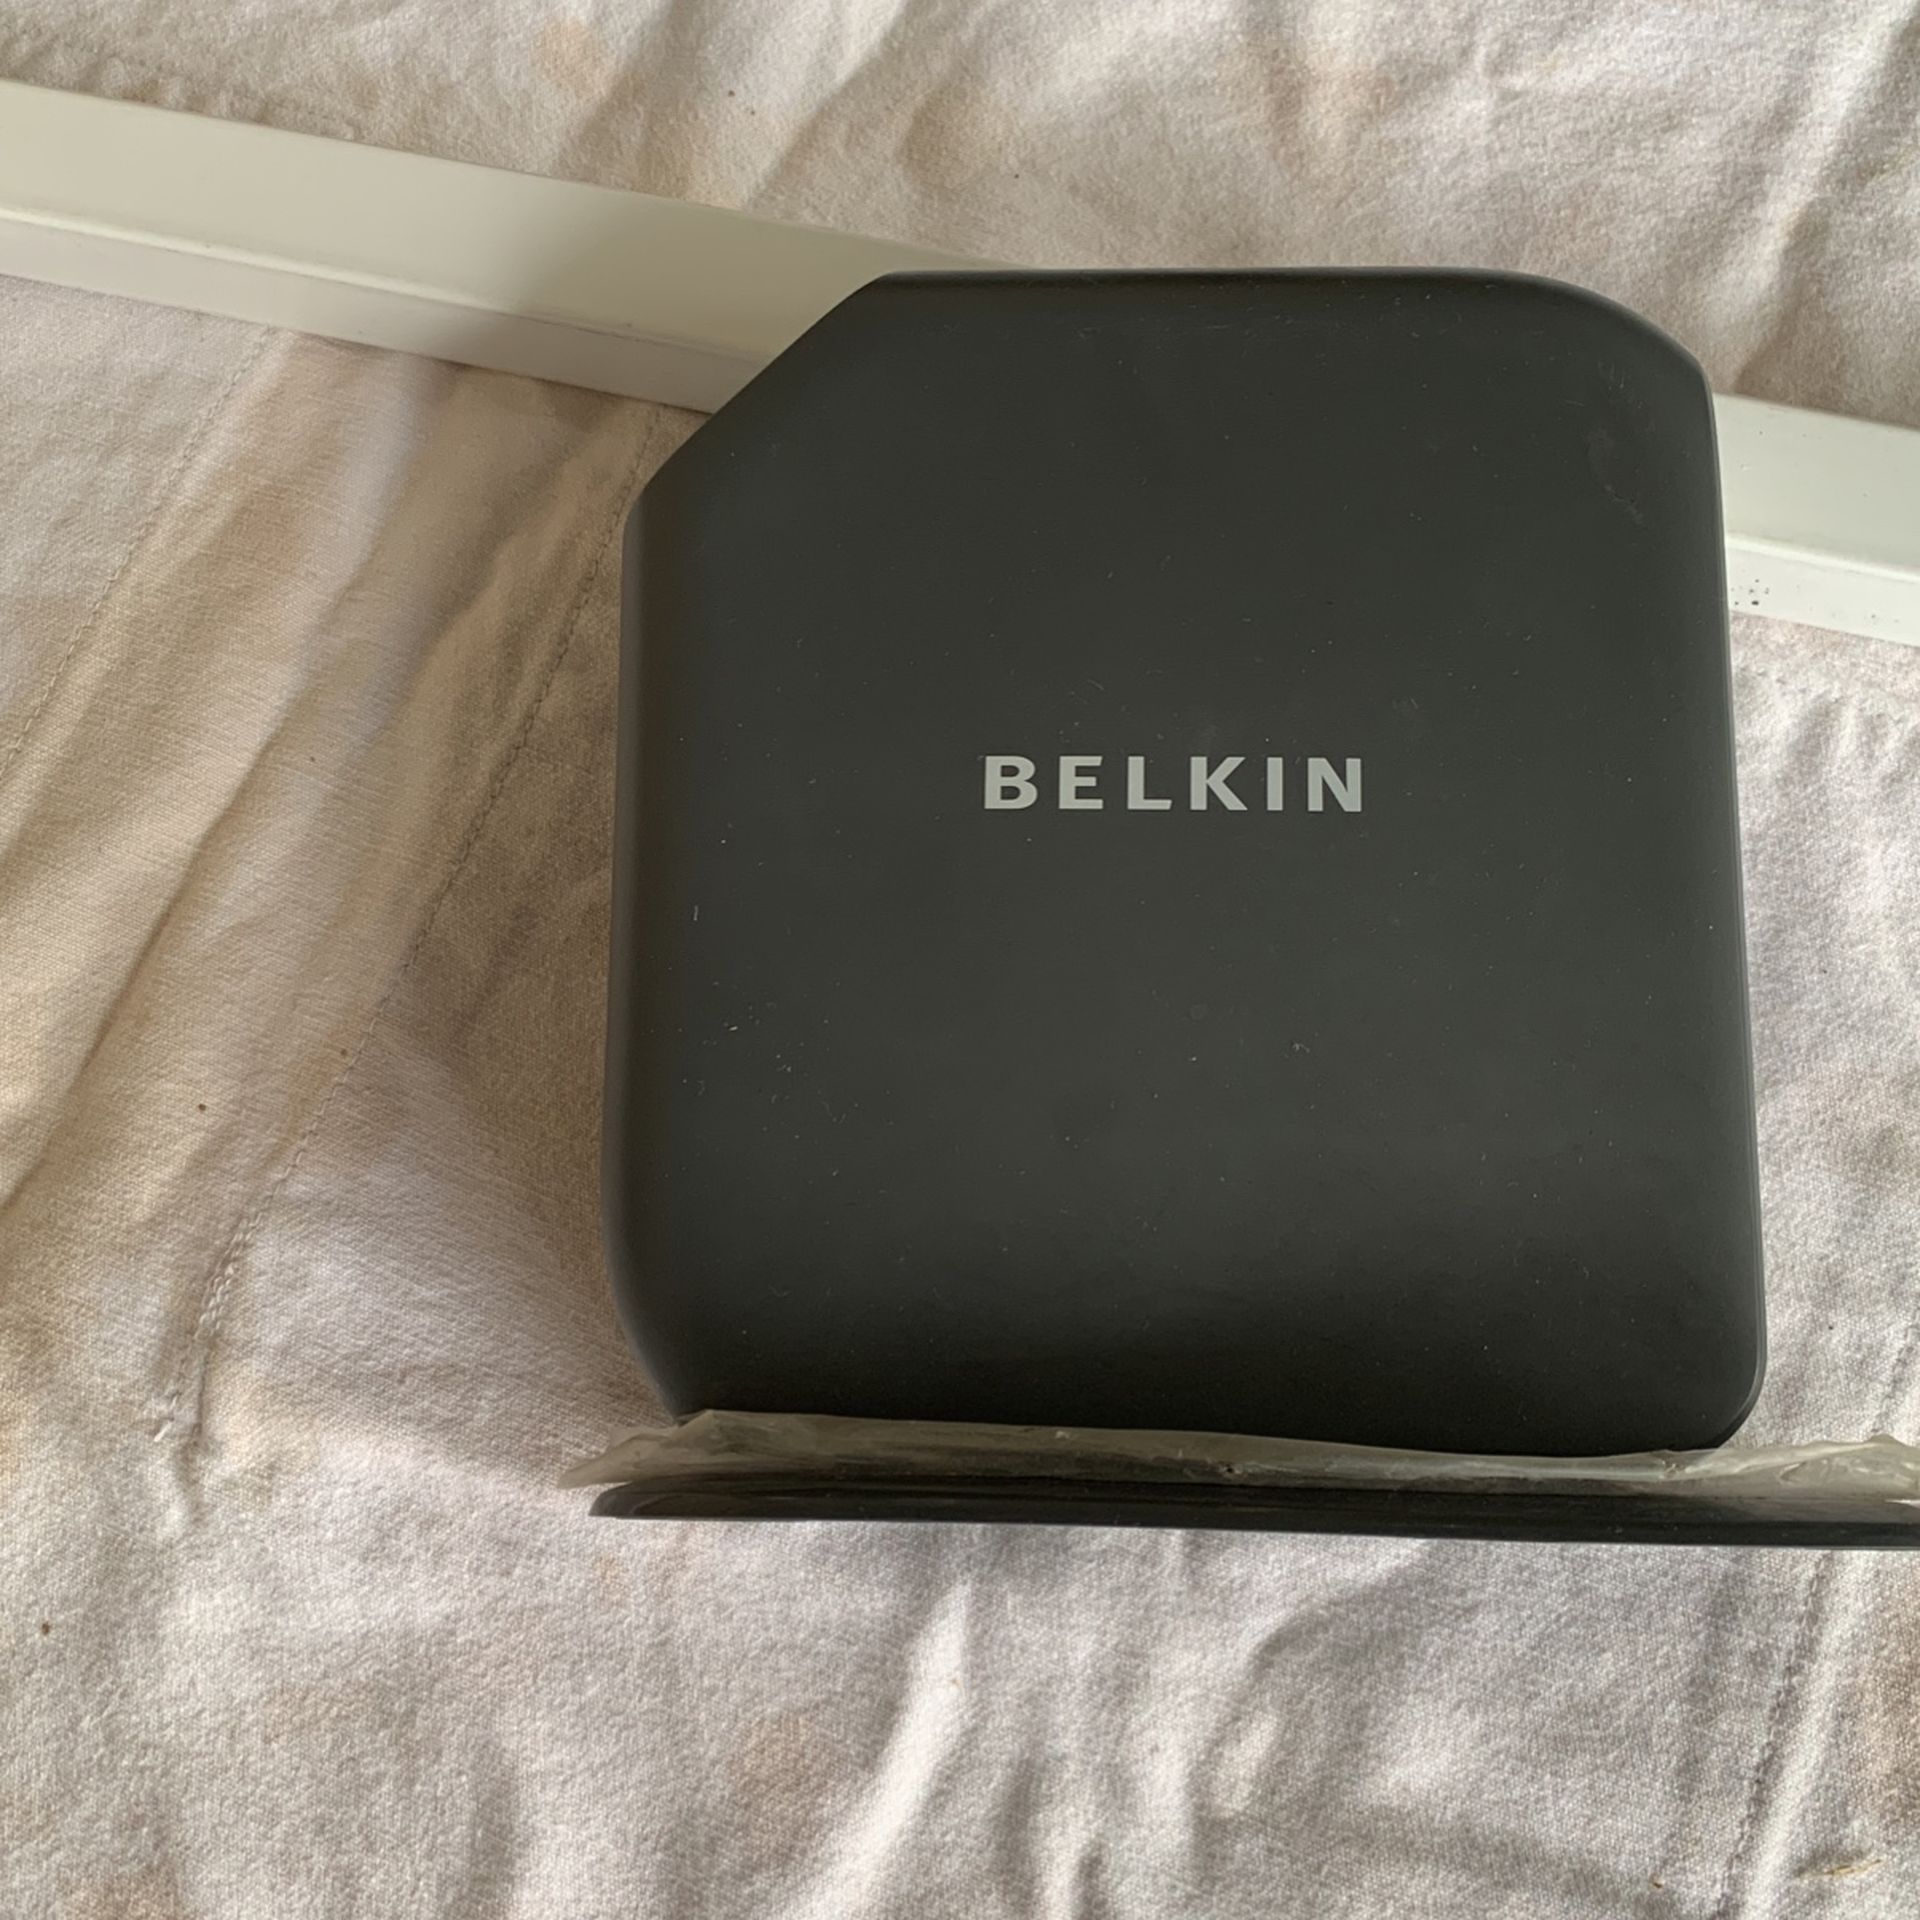 Belkin Share Max N300 Wireless Router + Lan Ethernet Connection Ports 2 USB Ports 